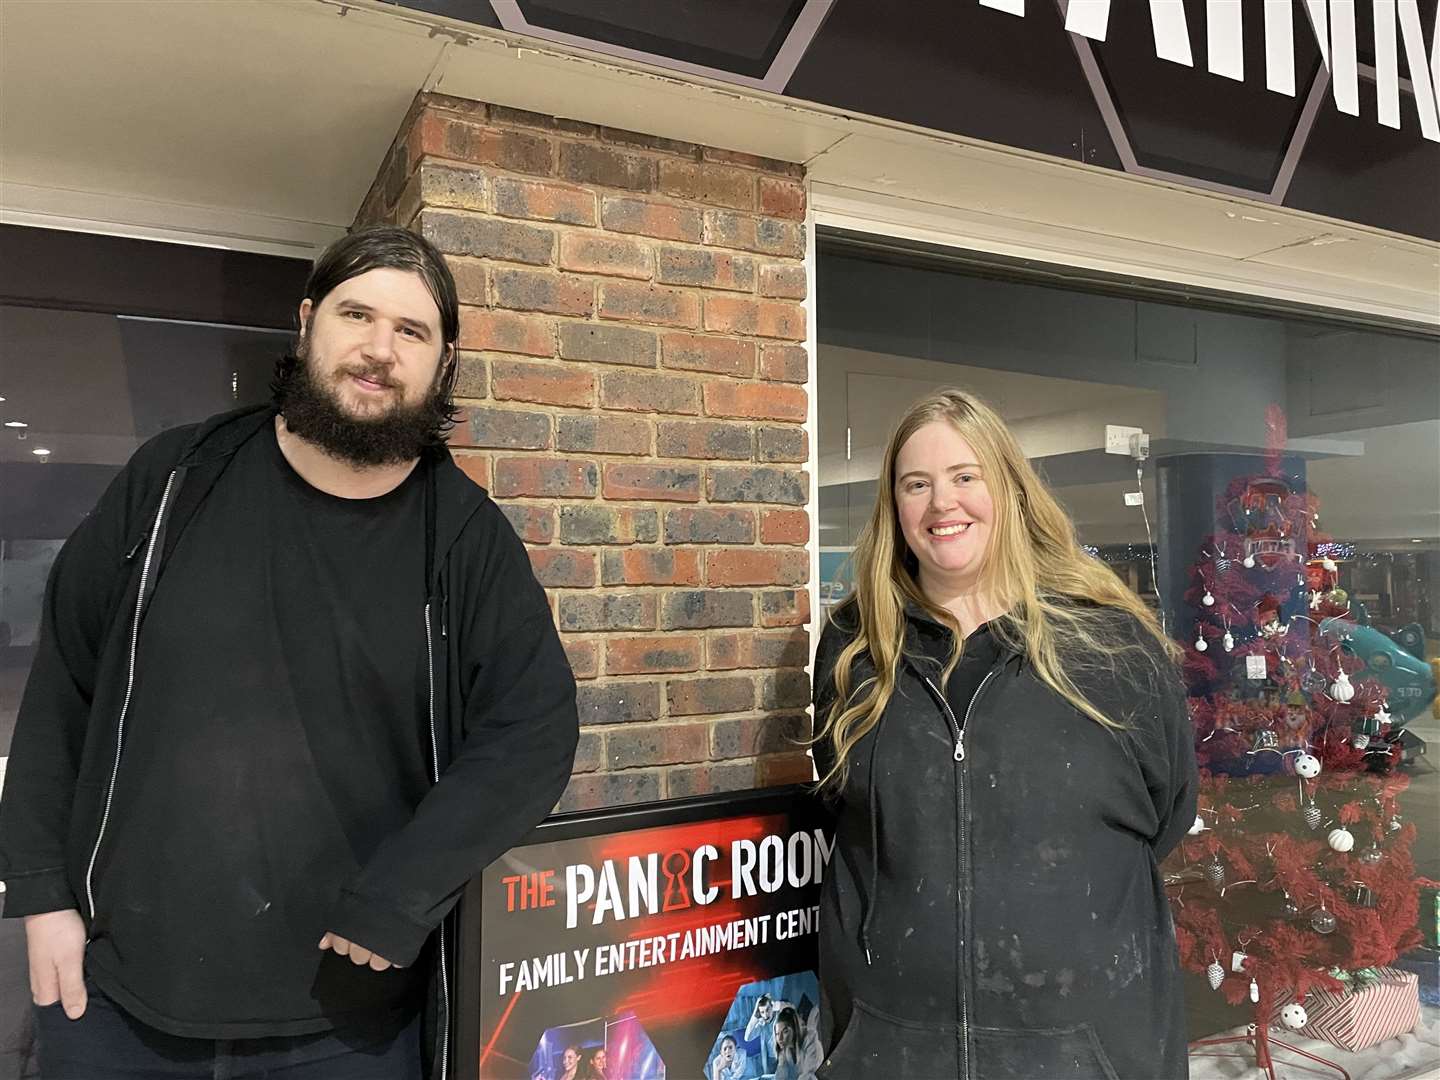 From left: Owners Alex and Monique Souter of The Panic Room Entertainment Centre in St Georges Centre, Gravesend